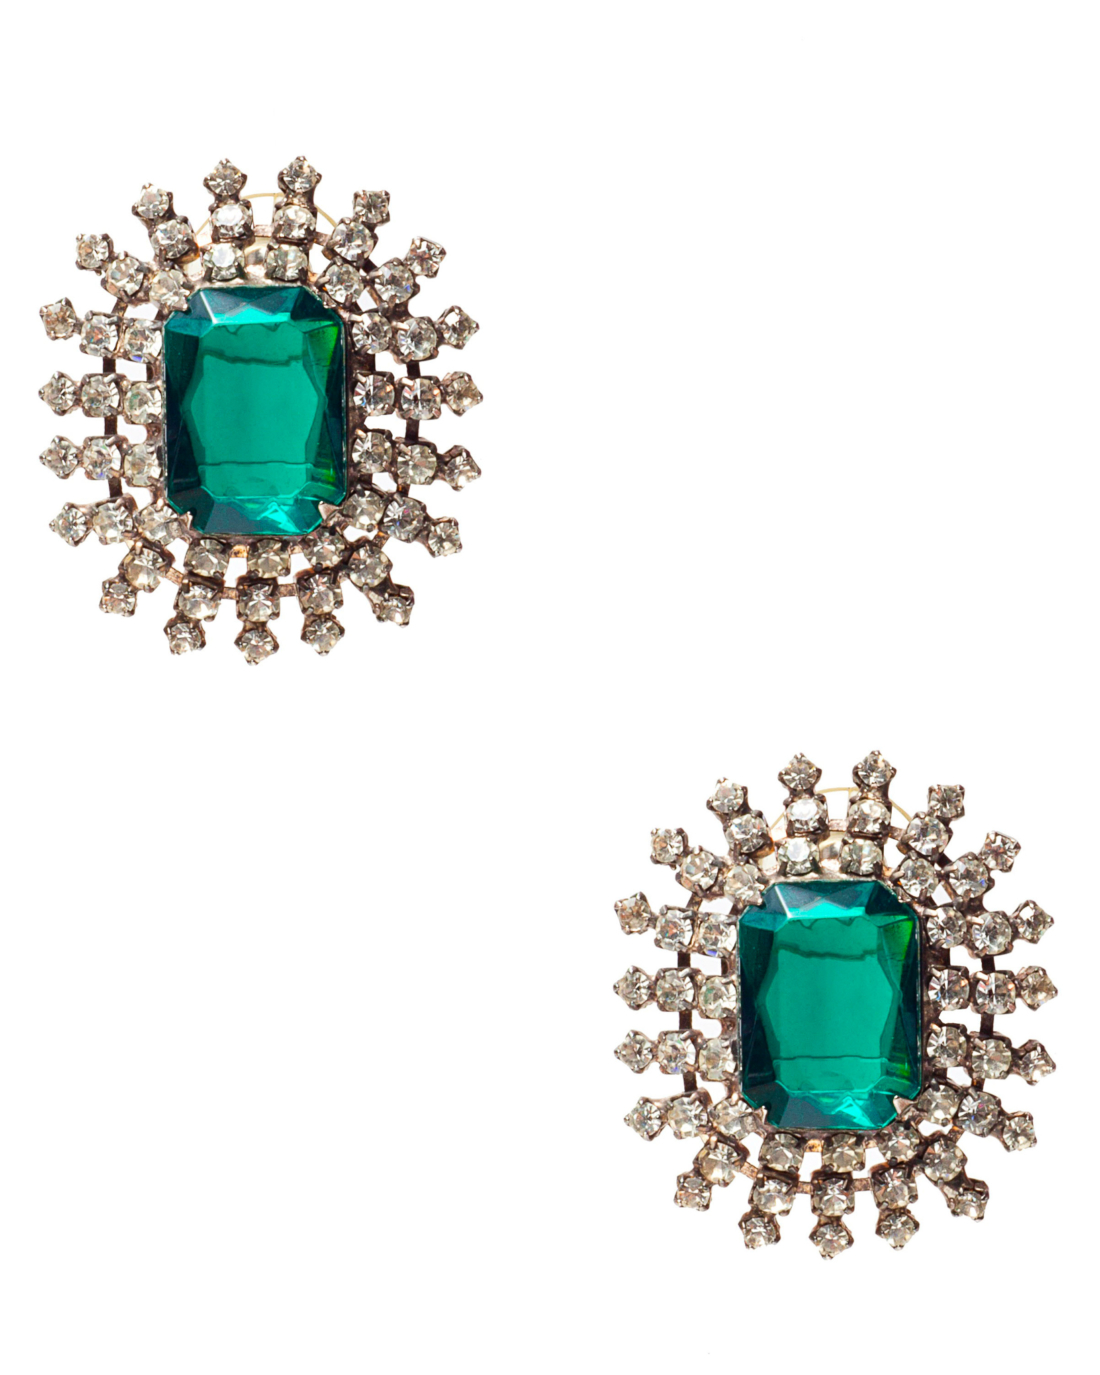 Emerald Green And Crystal Starburst Earrings, circa 1950’s